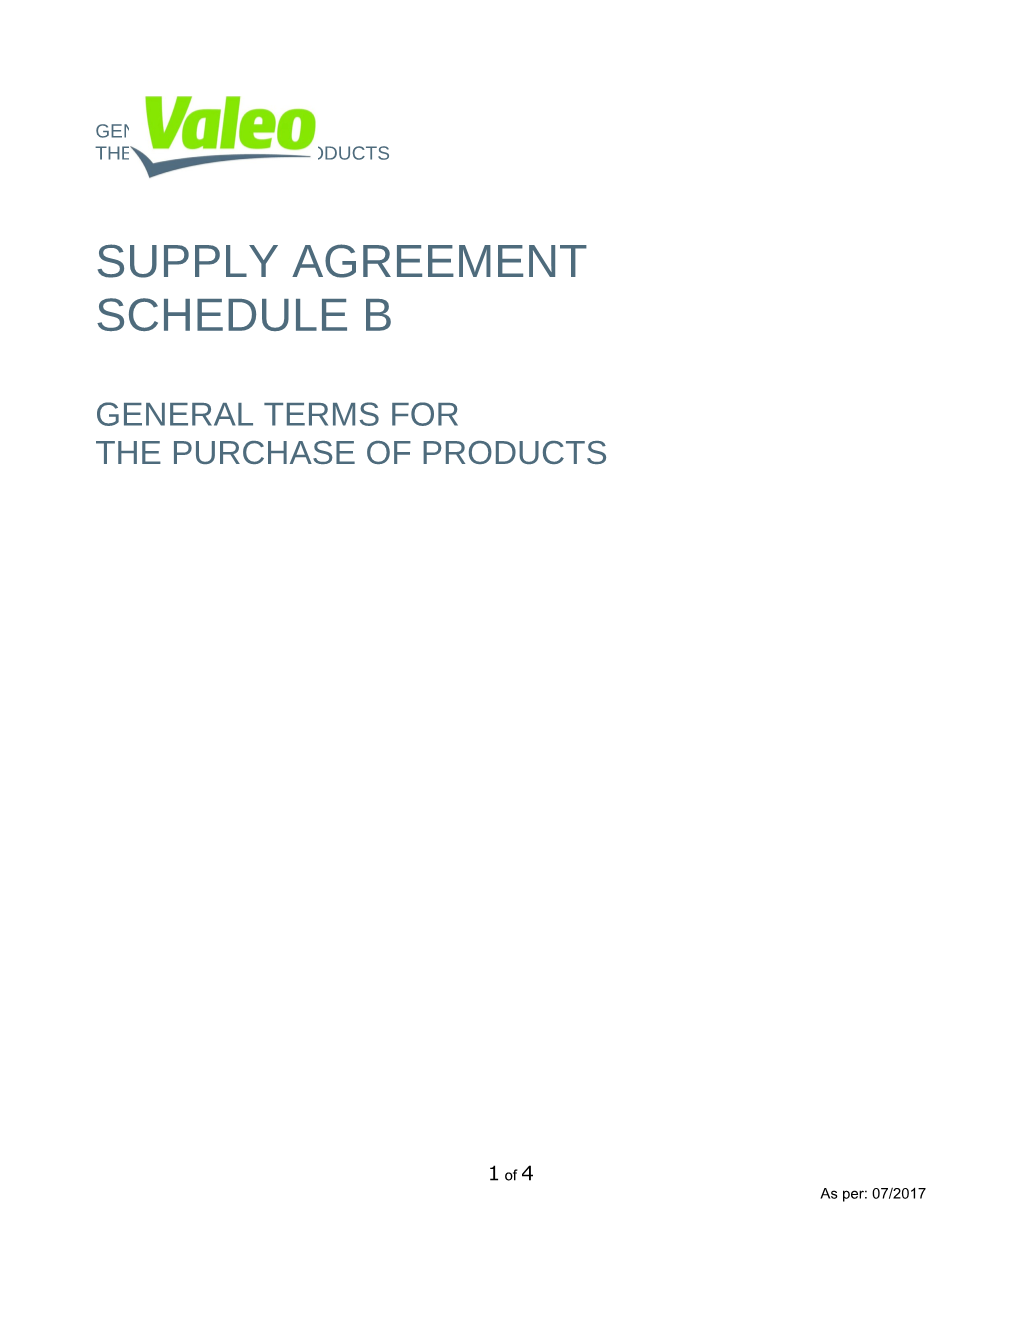 General Terms for the Purchase of Products